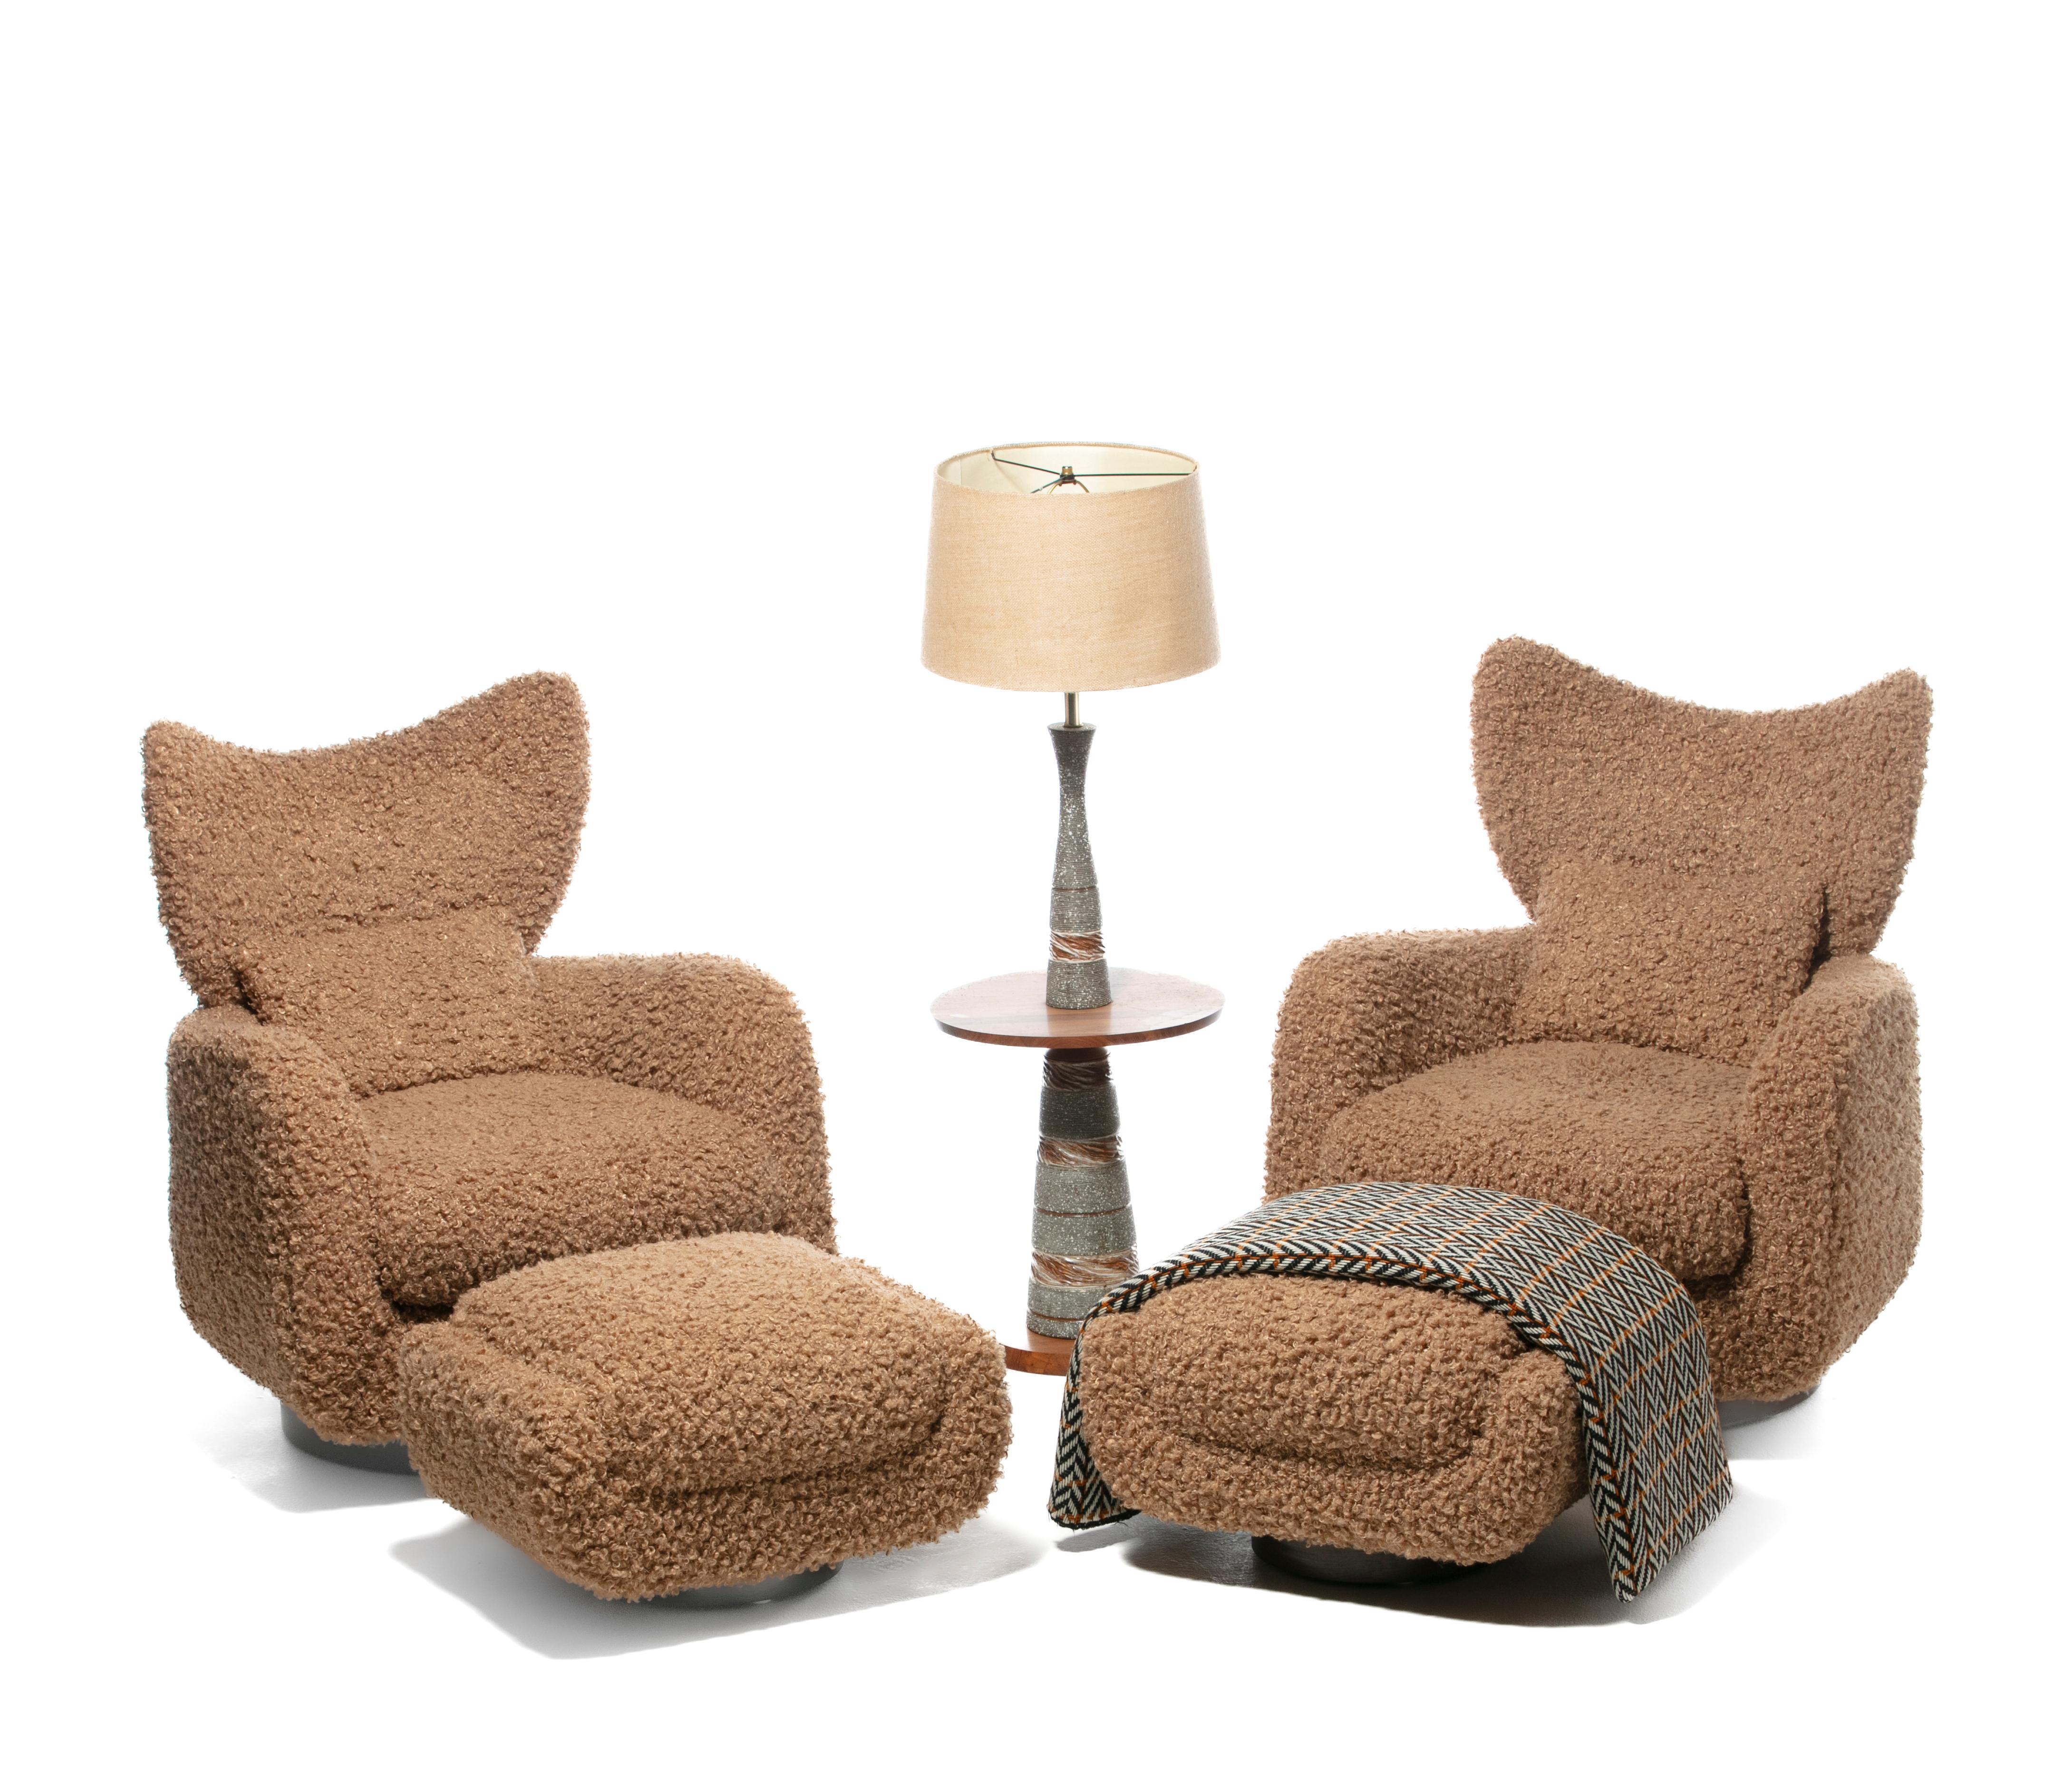 If you want to be the envy of your friends and fellow designers, here's how you do it. Rare pair of Vladimir Kagan Swivel Wingback Chairs for Directional with custom ottomans freshly and expertly upholstered in curly latte fabric. Sculptural and